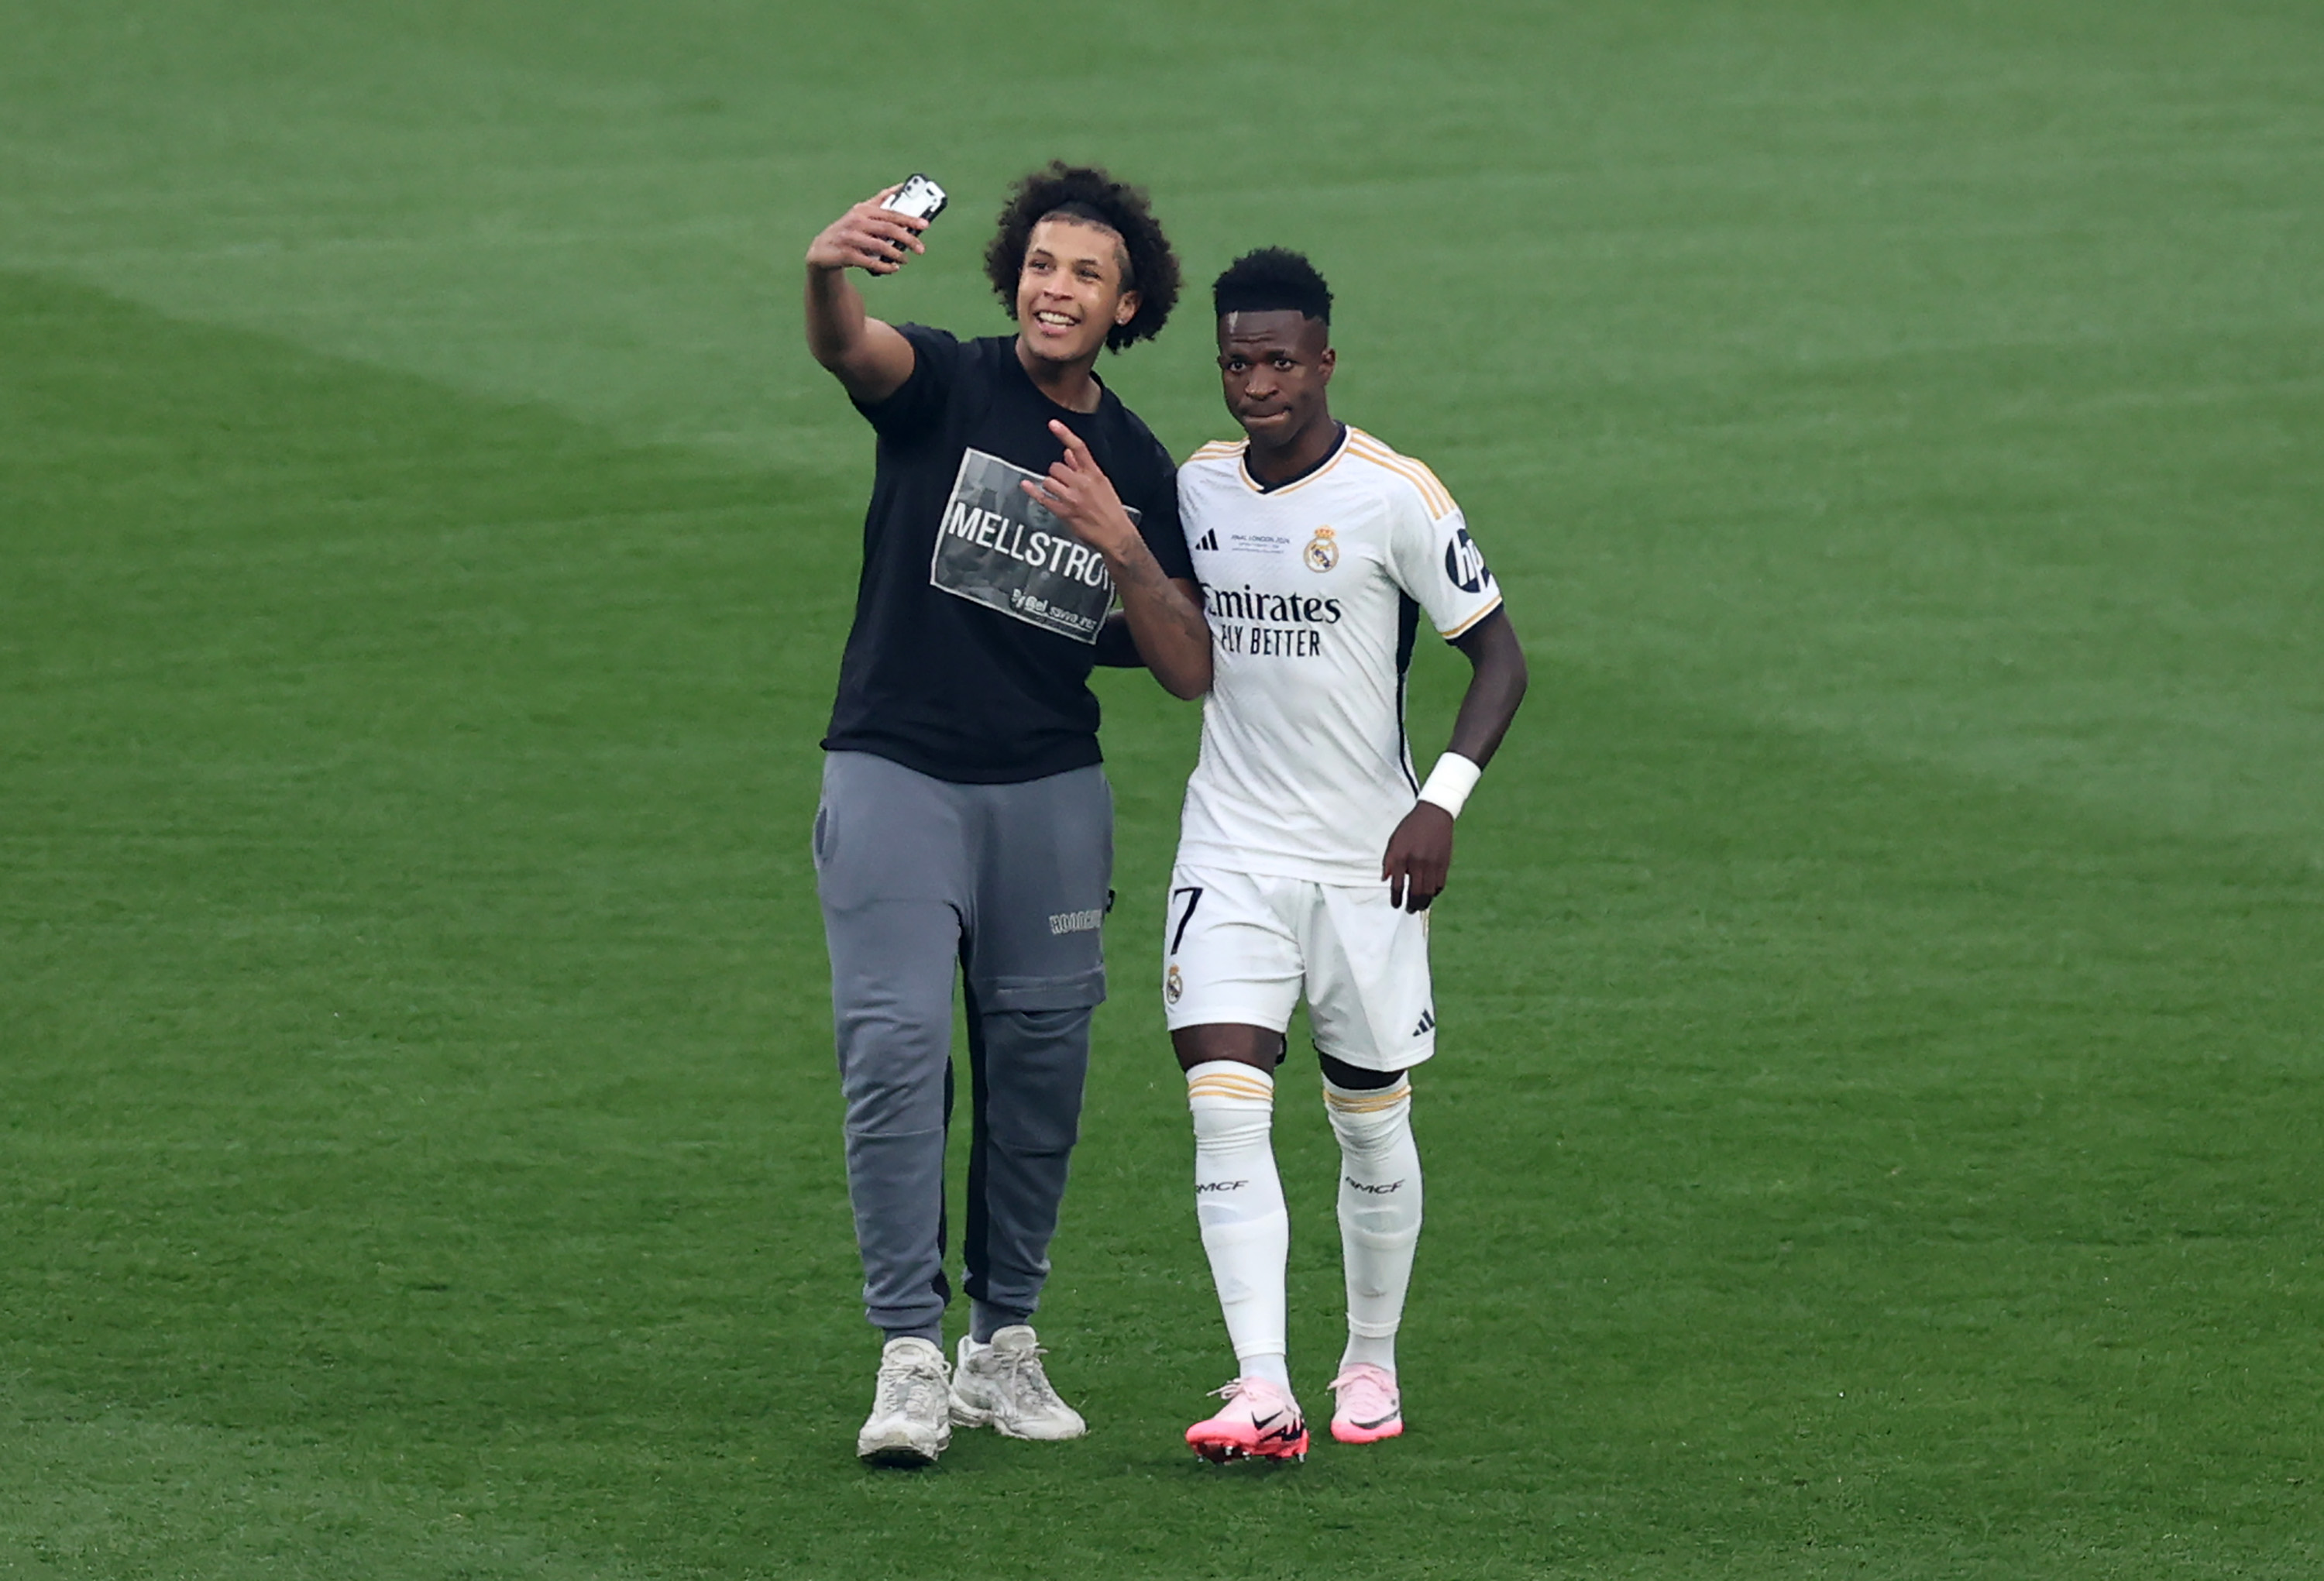 A pitch invader attempts to take a selfie on a mobile phone with Vinicius Jr